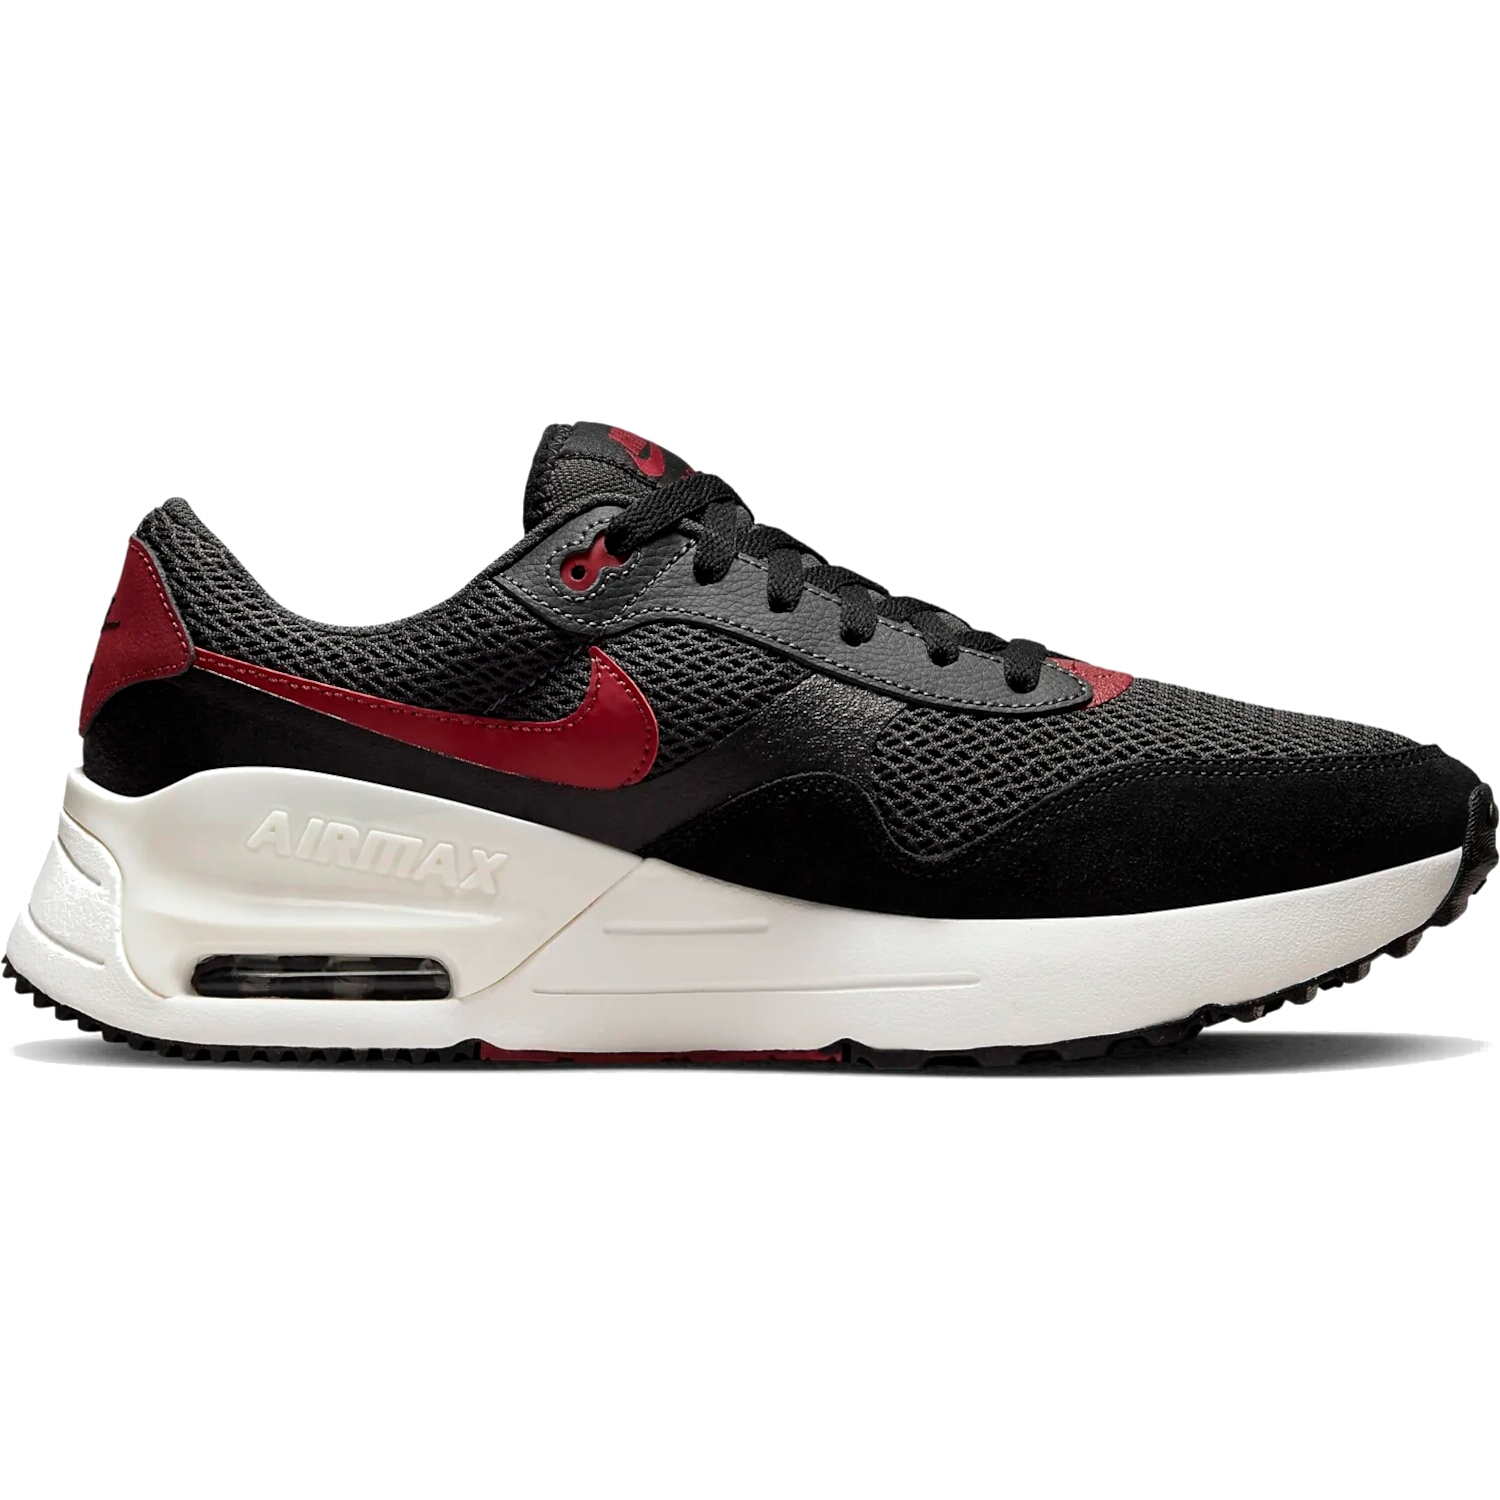 NIKE MAX SYSTEM SNEAKERS DM9537-003 - wbsport.nl